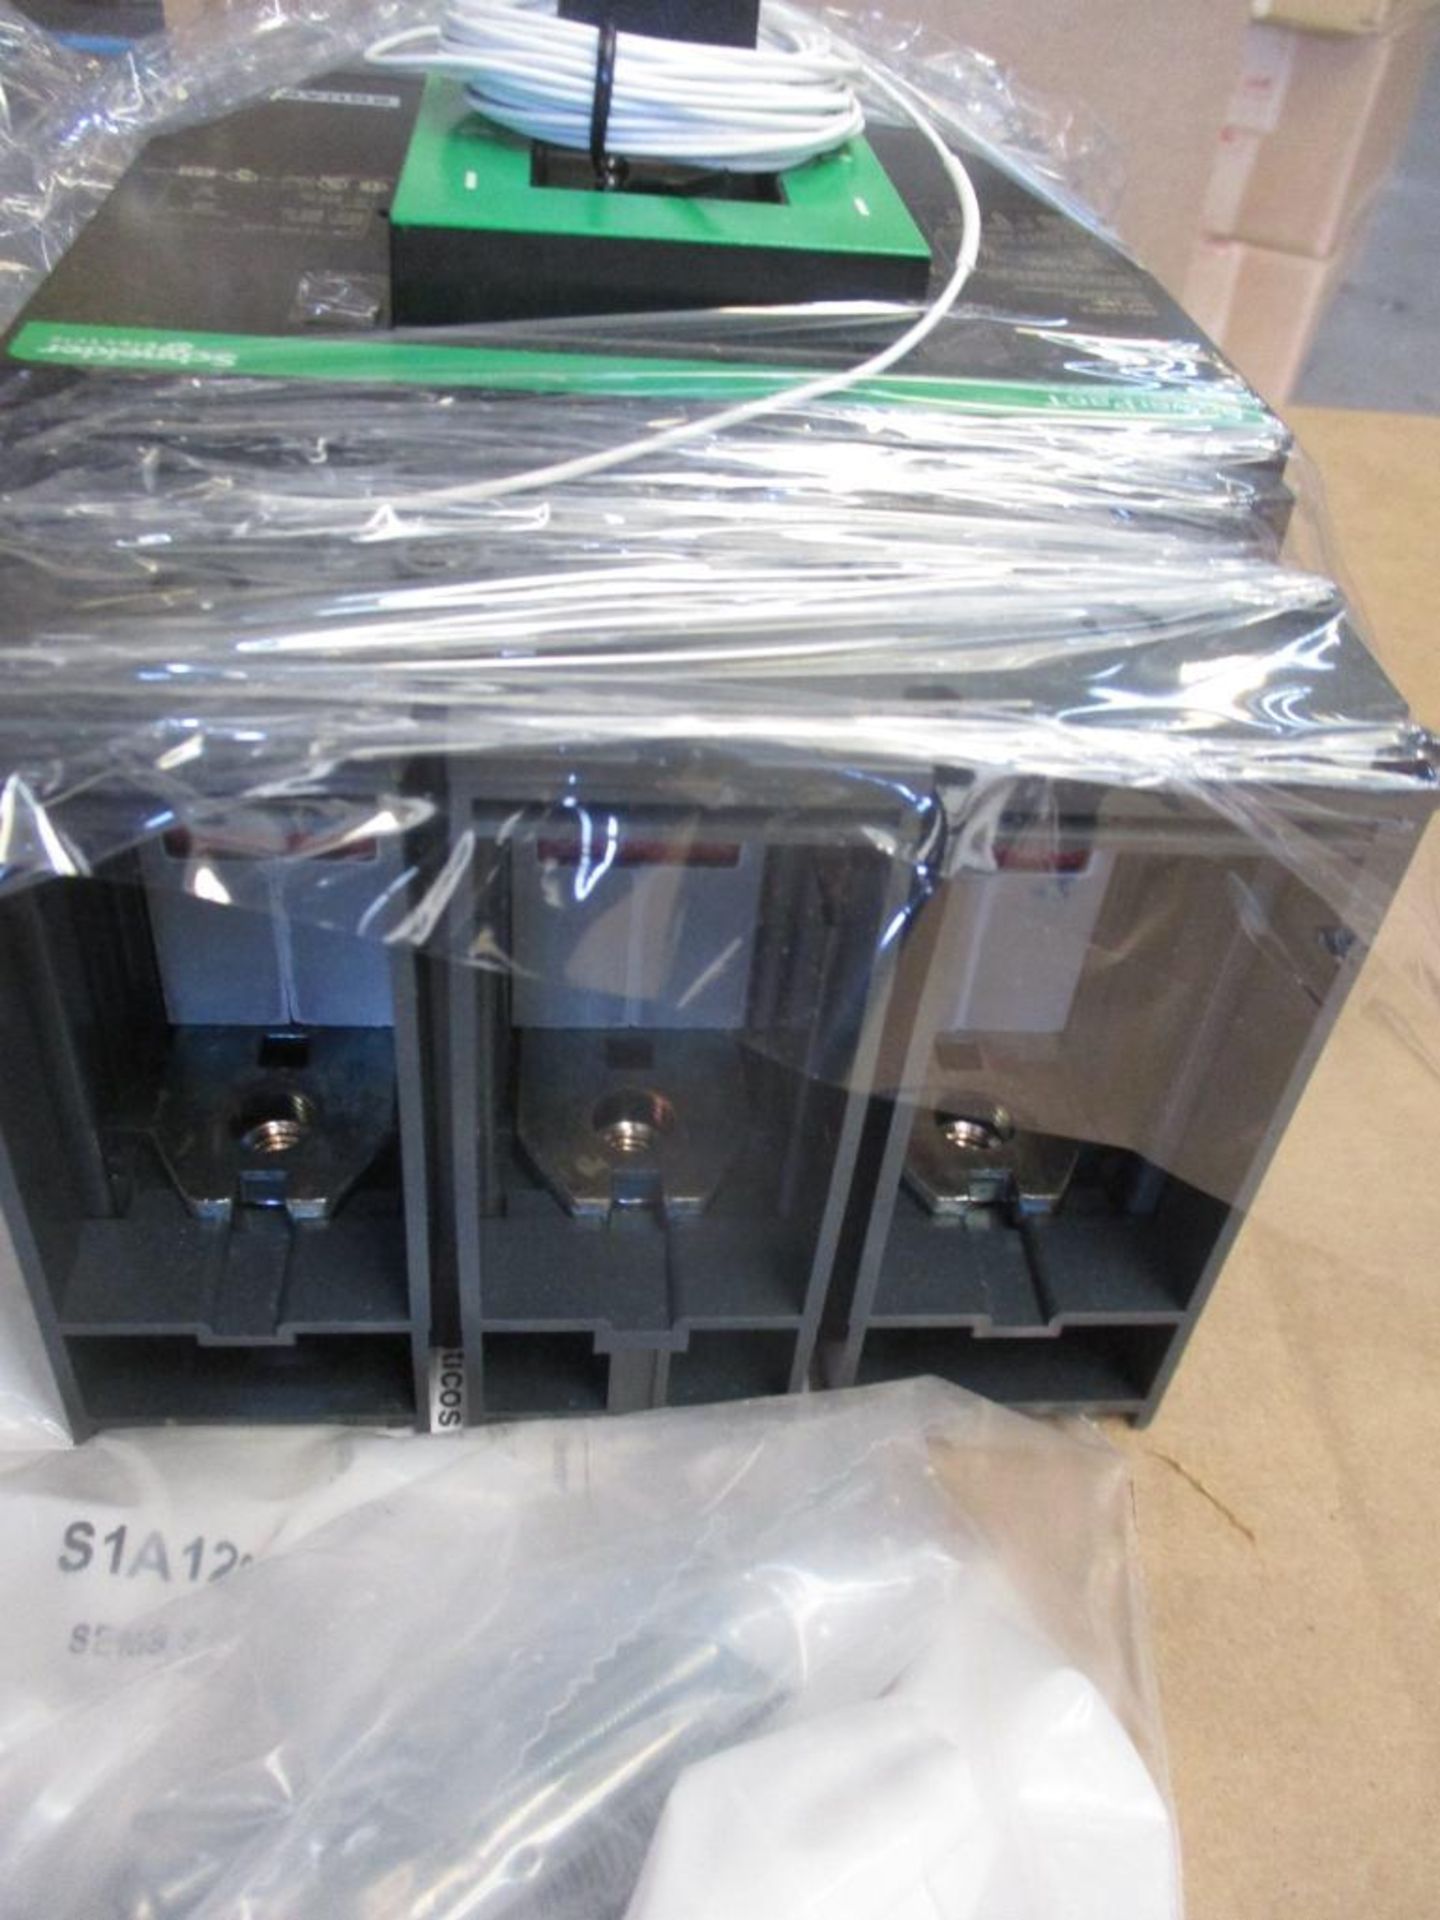 Square D 400 AMP Circuit Breaker, 556149P2, 3P, 400A, 600VAC, PowerPacT LG 400 (New in Box) - Image 3 of 4